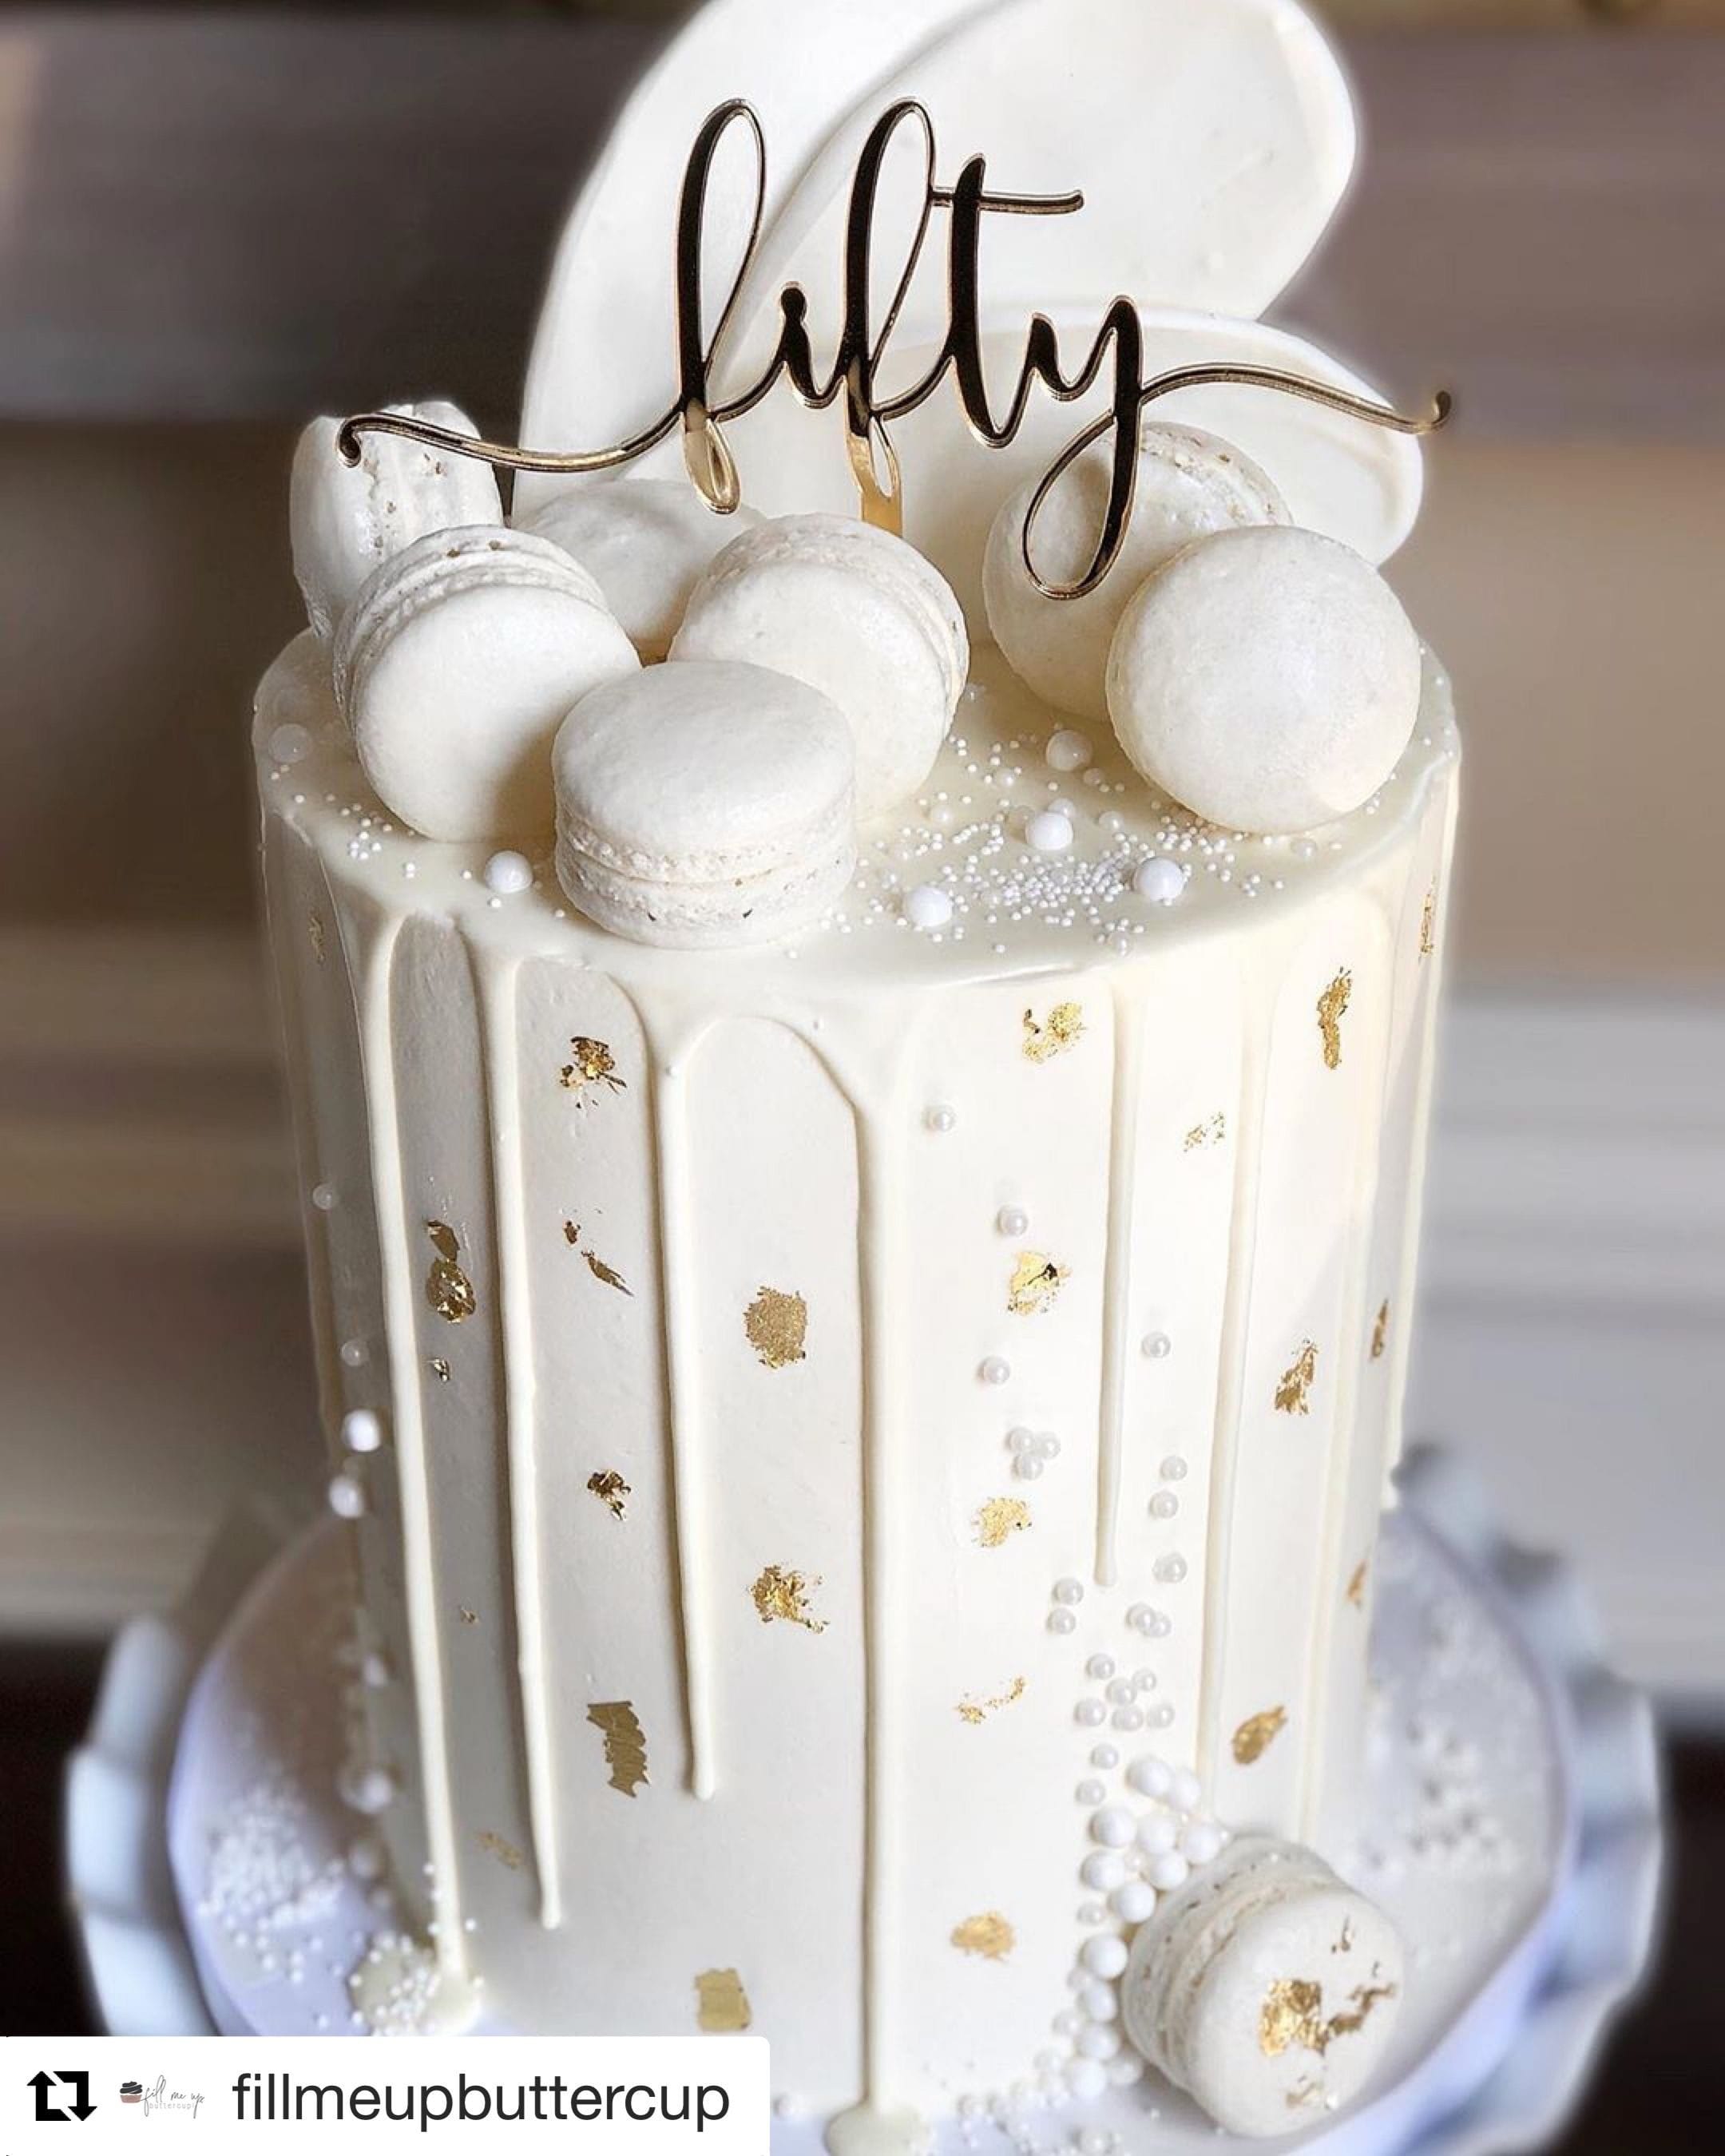 Topper: Gold Mirror Acrylic
Cake: Fill Me Up Buttercup